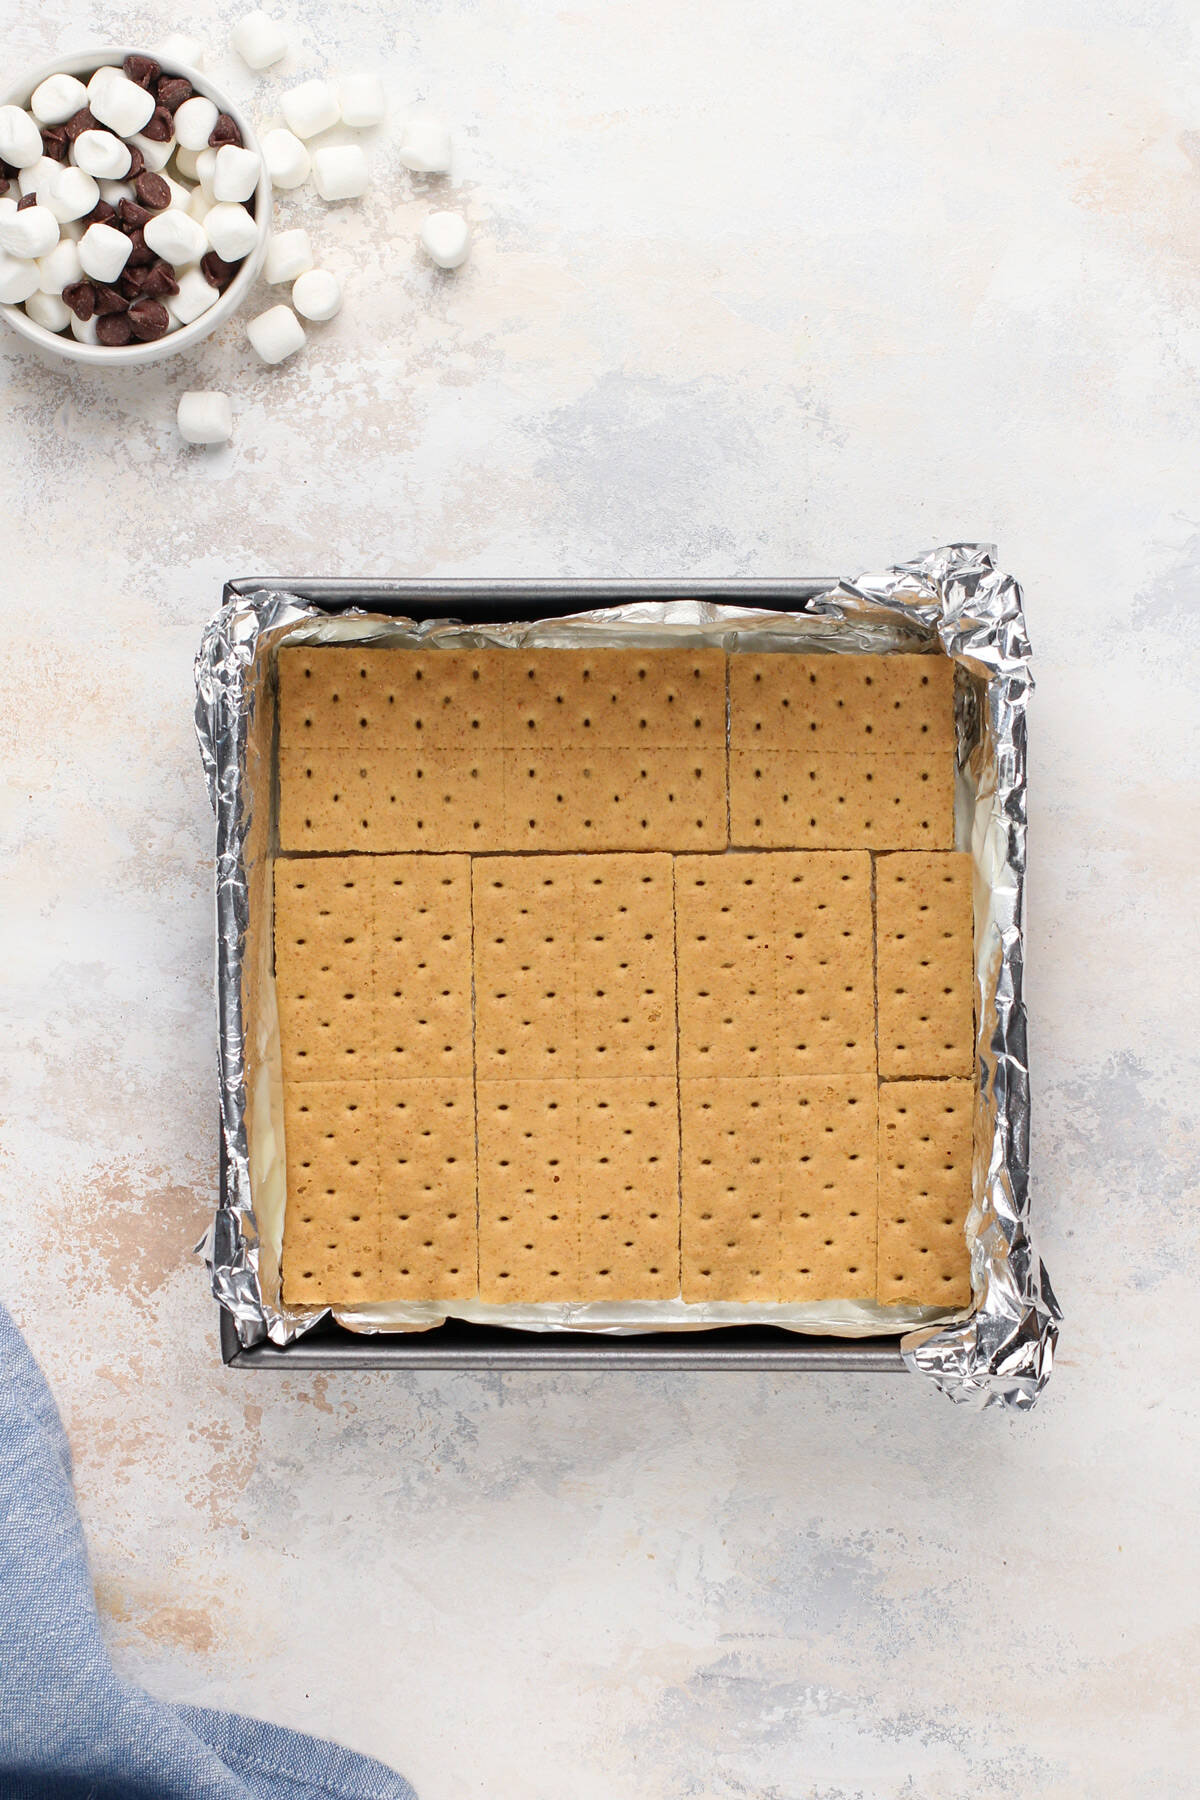 Graham crackers fit into the bottom of a foil-lined baking pan.